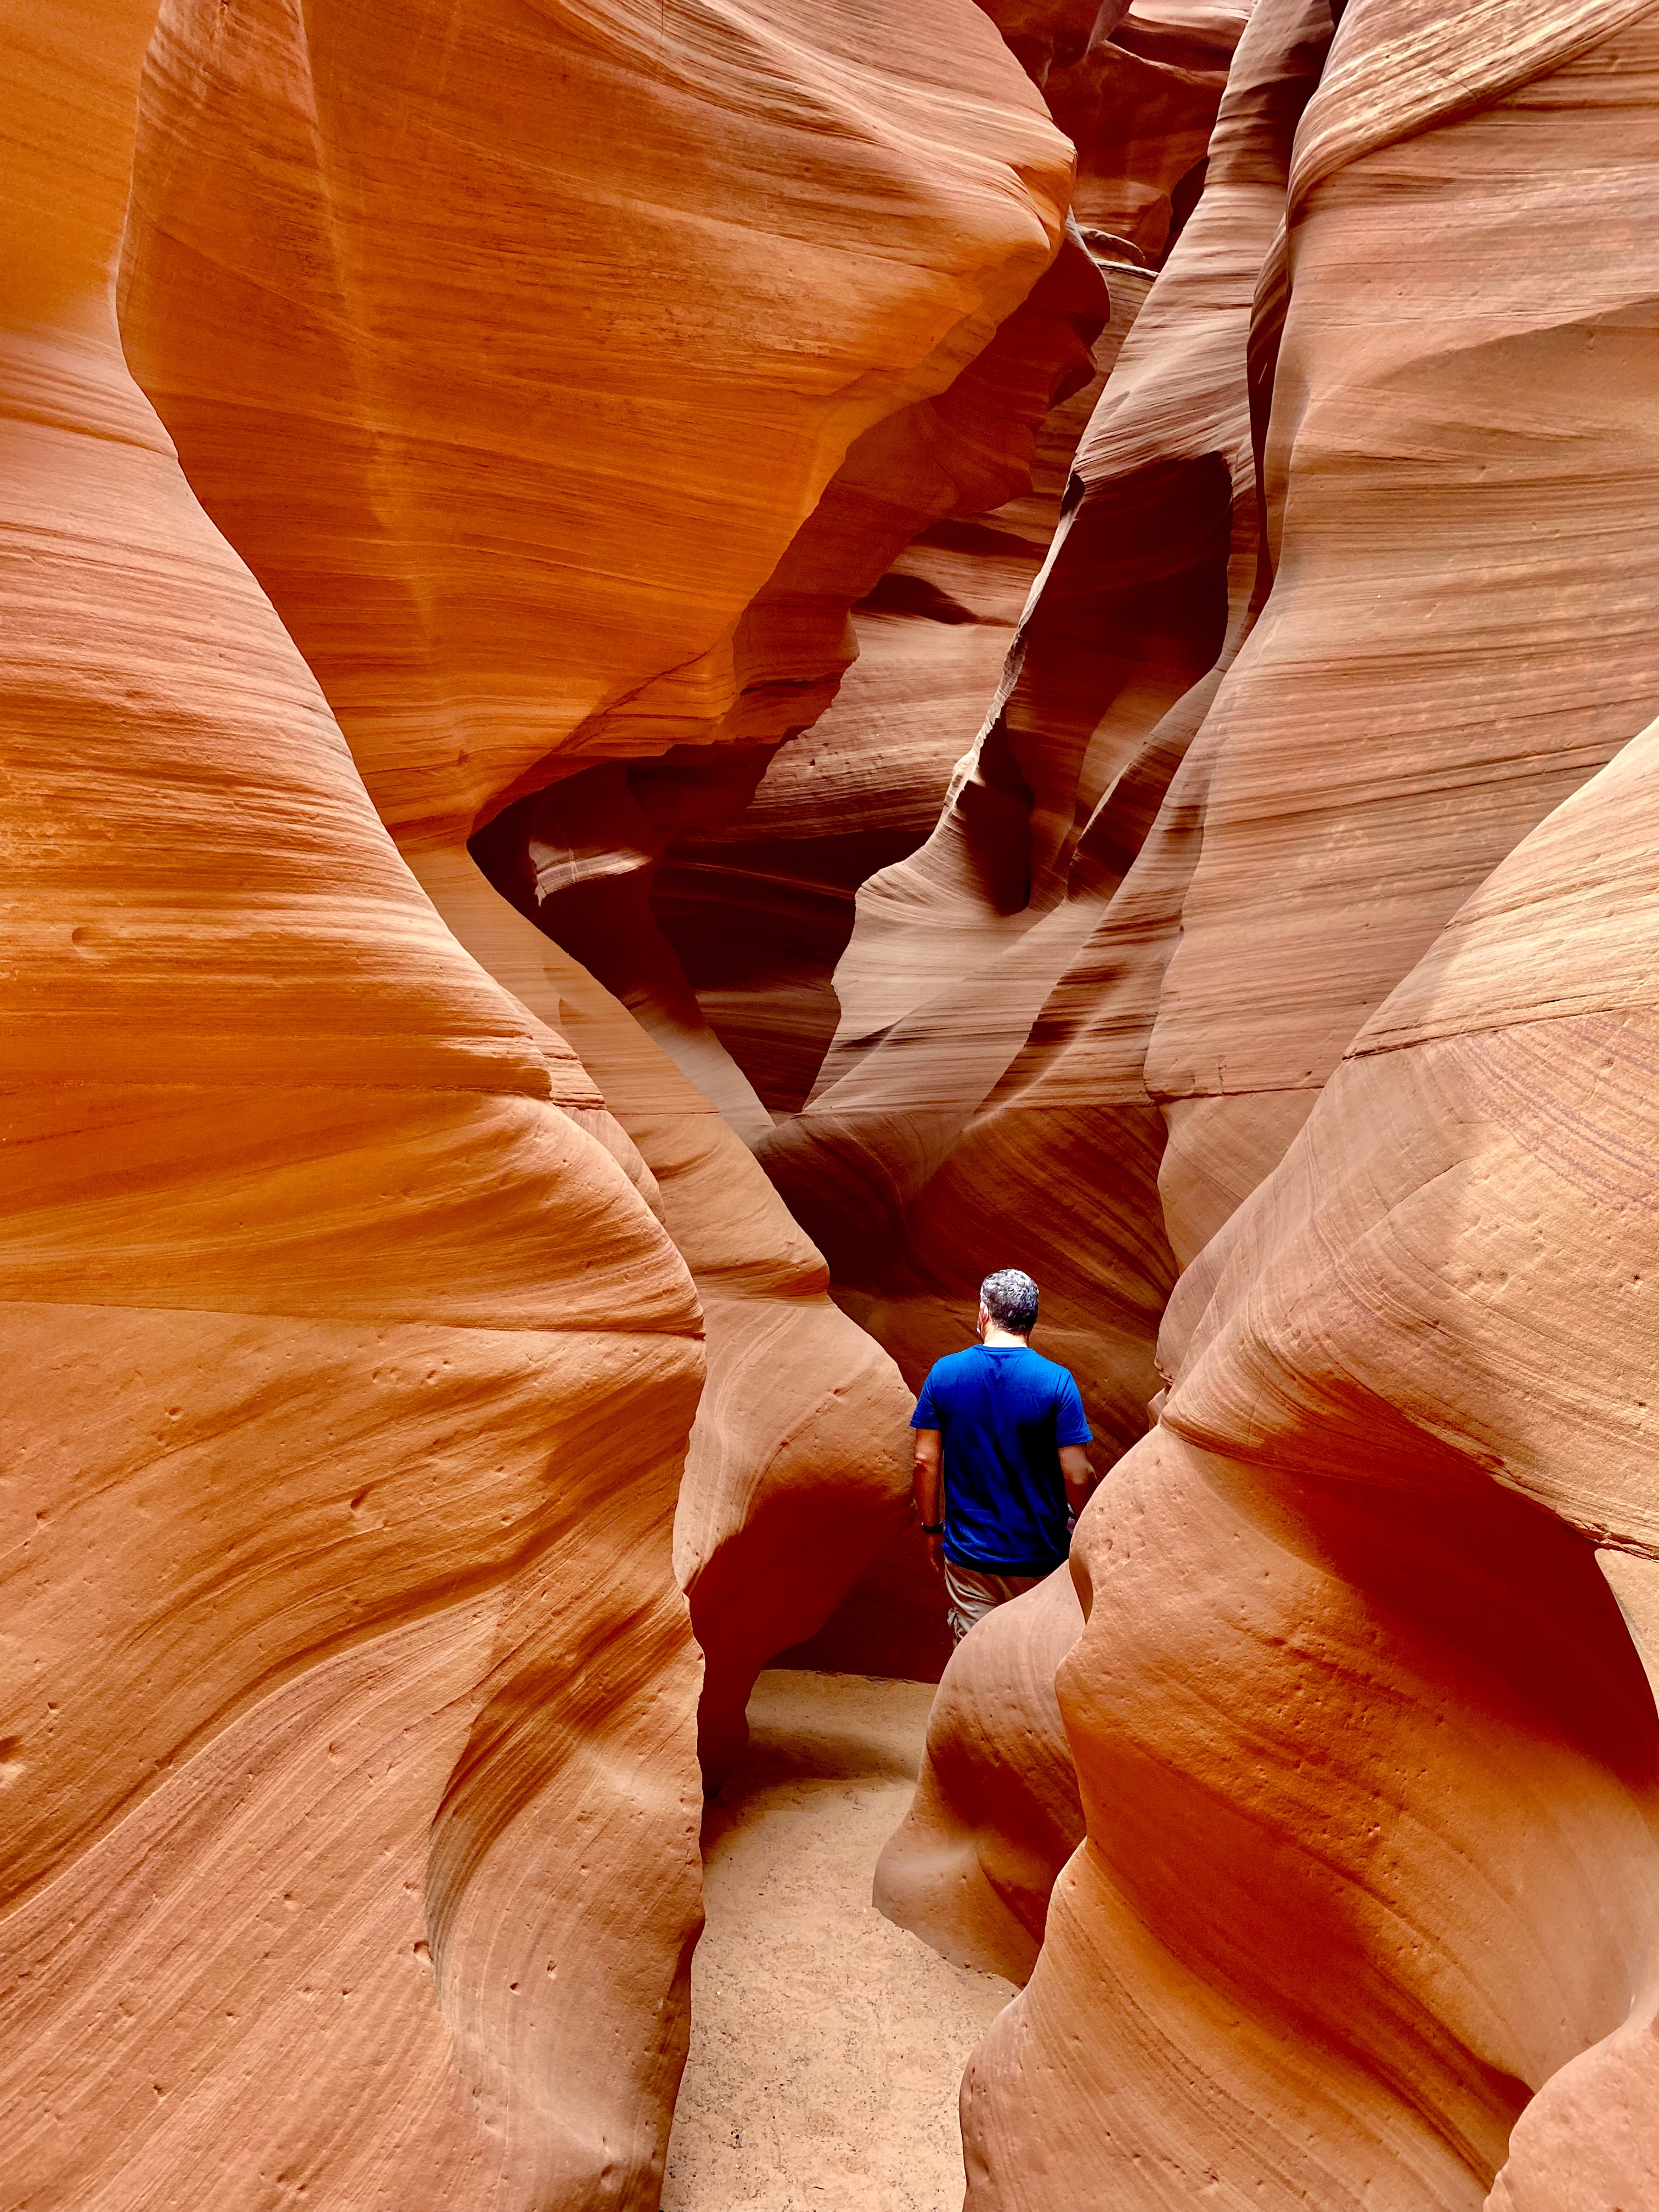 Antelope Canyon X Admission Ticket